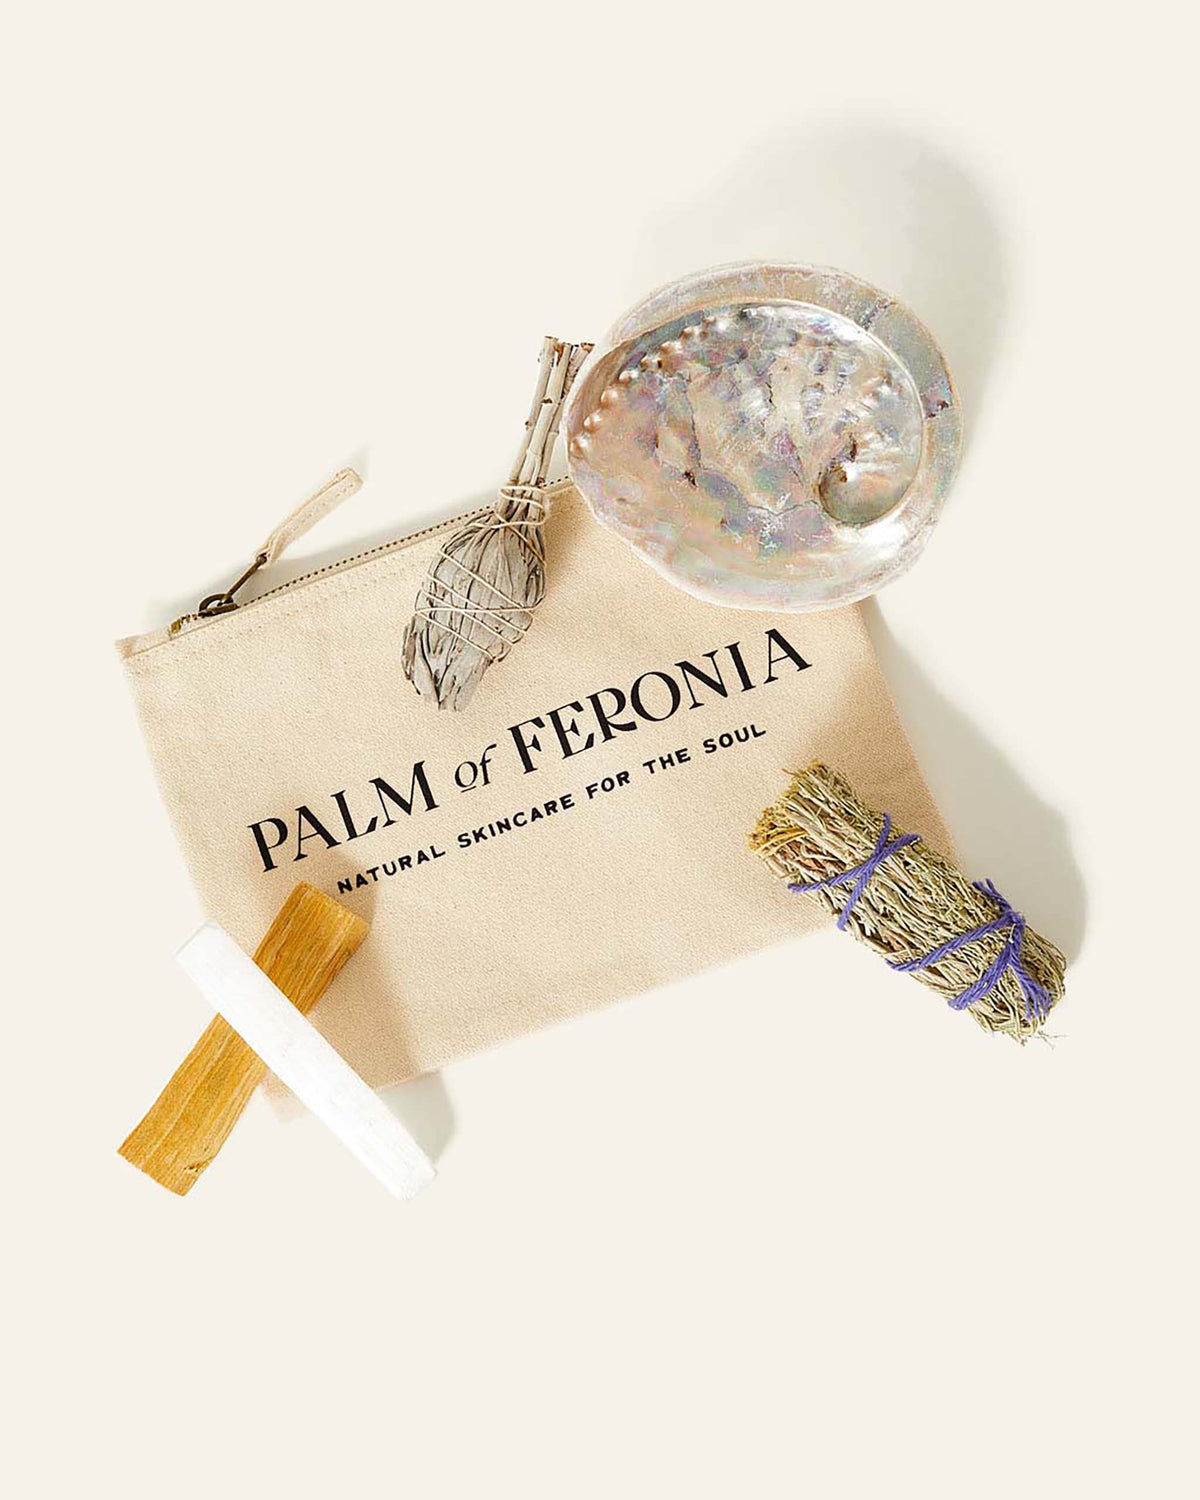 The Collection – Palm of Feronia